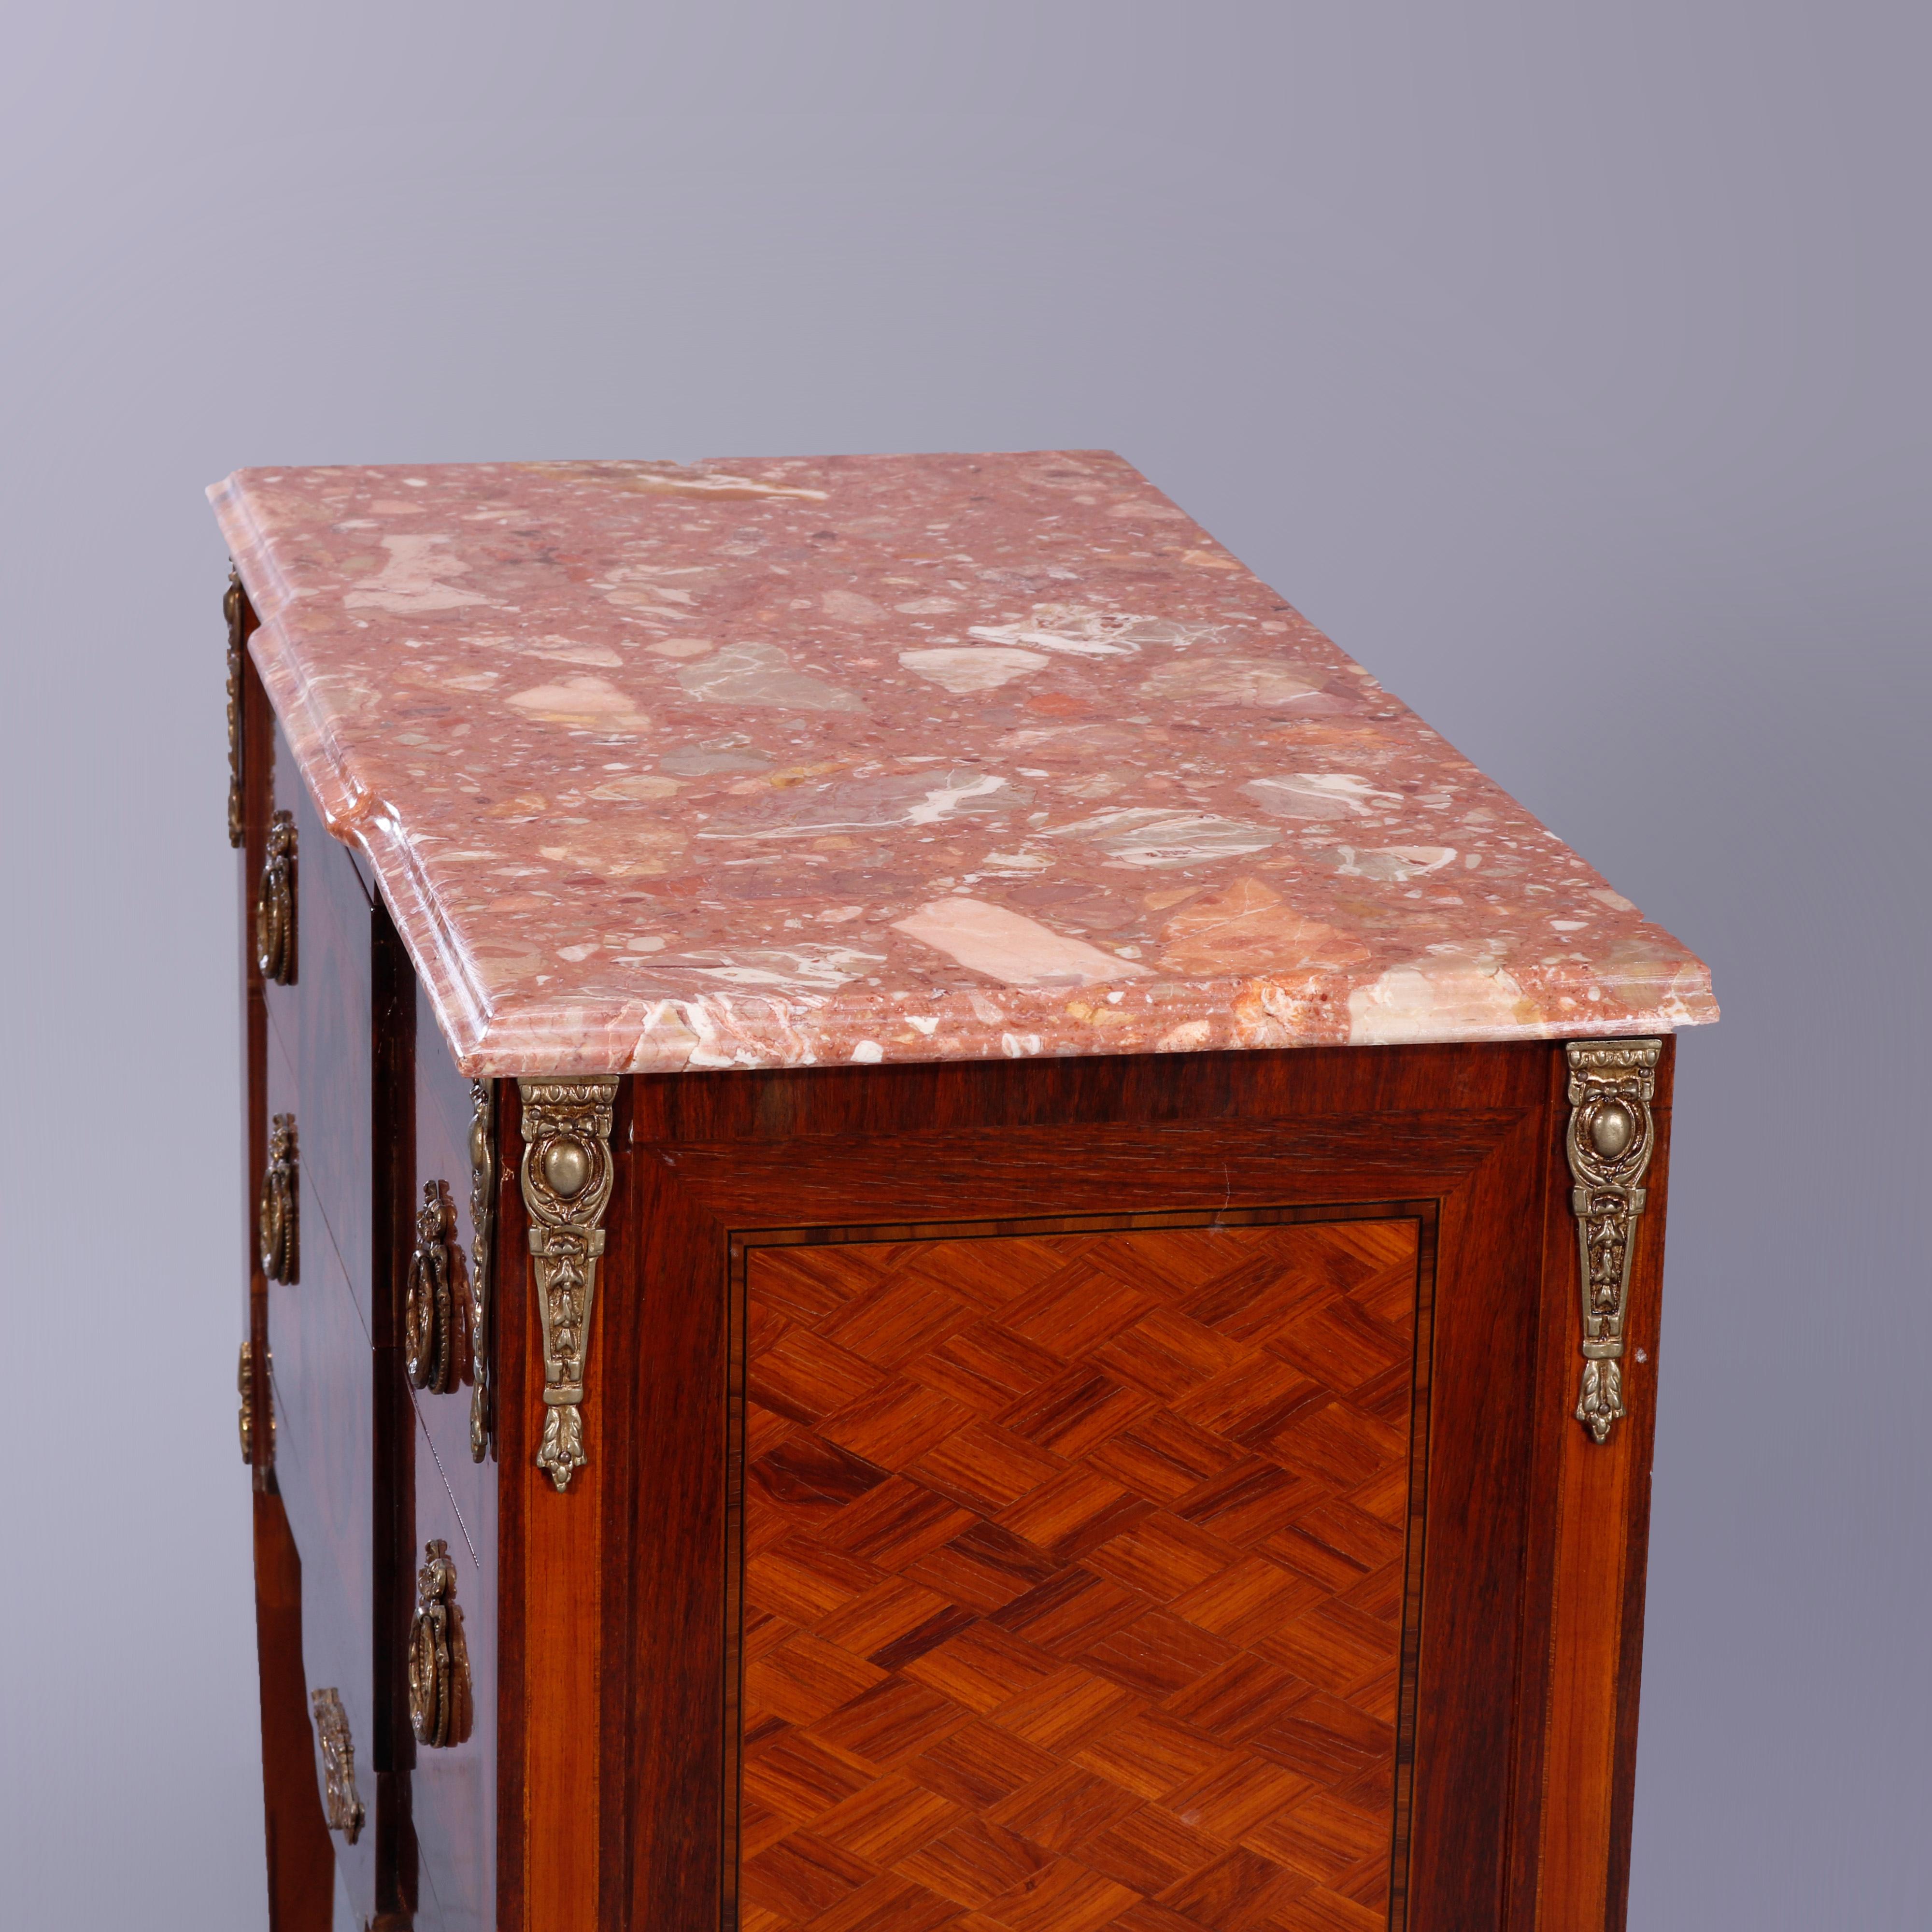 An antique French Louis XVI style commode offers beveled marble top over double drawer commode having kingwood and rosewood construction, parquetry panels, central marquetry inlaid panier de fleurs (basket of flowers), and foliate cast ormolu